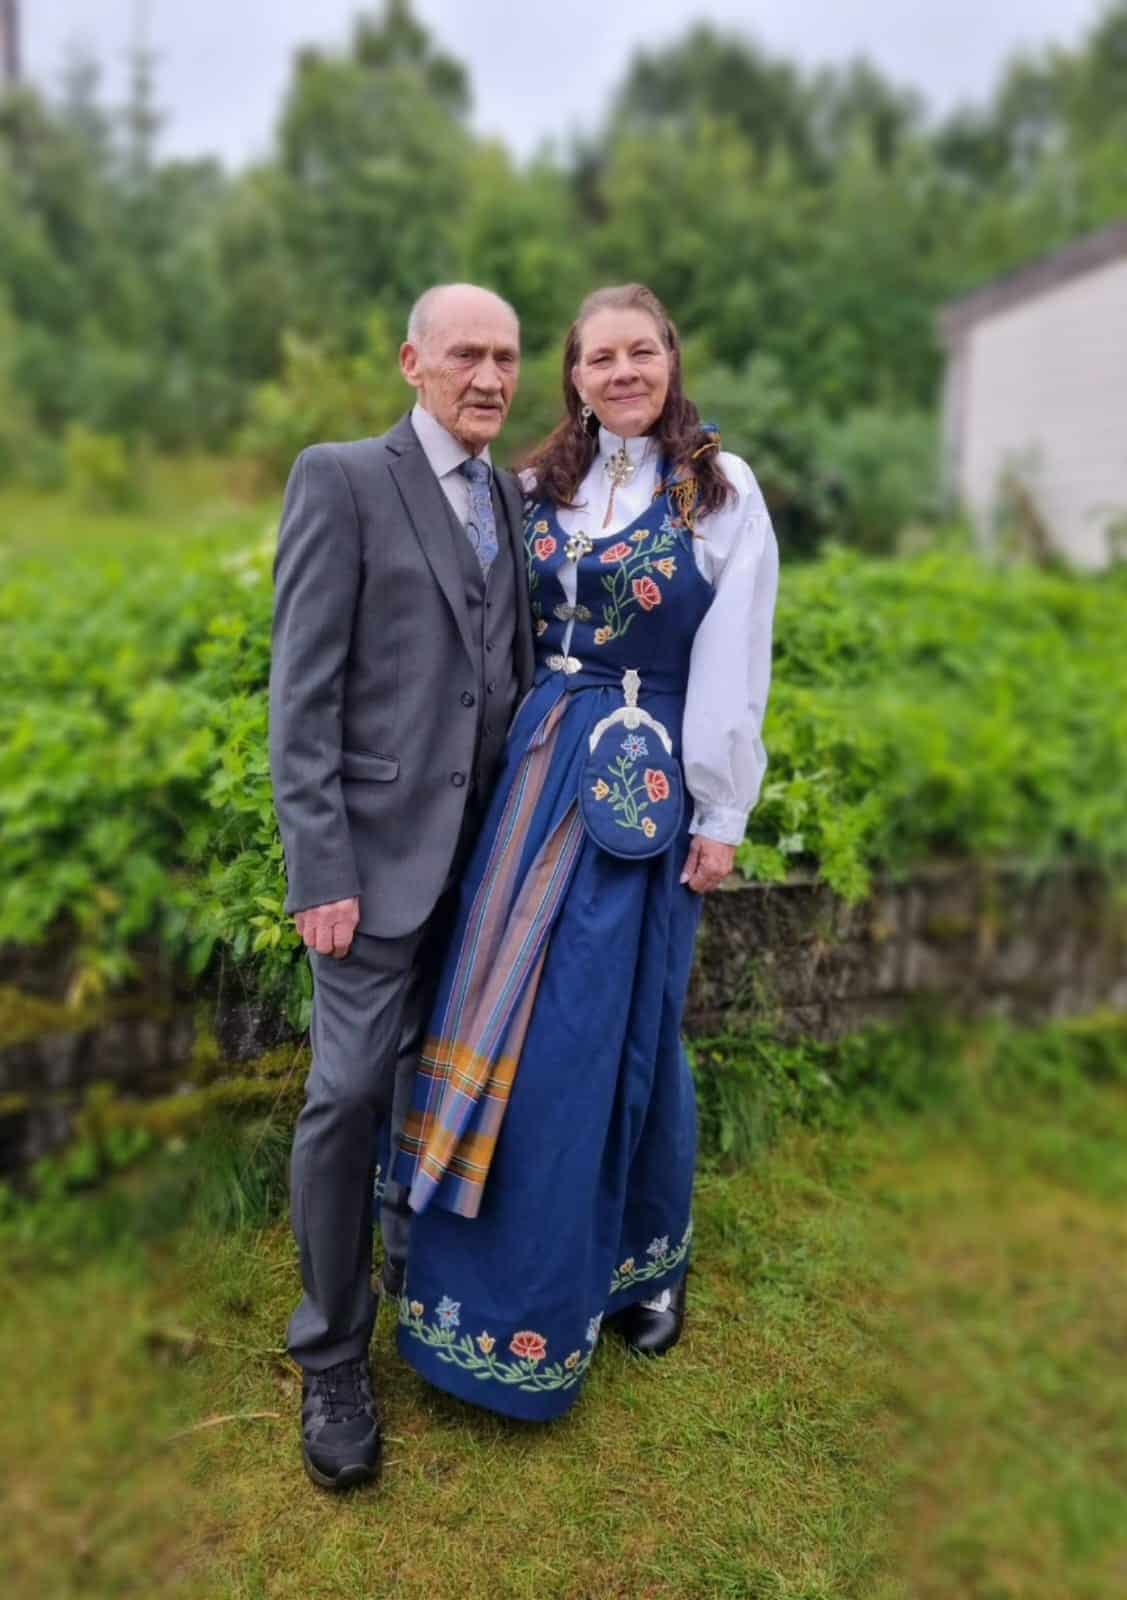 Patty dressed in traditional Norwegian <i>bunad</i> with her father